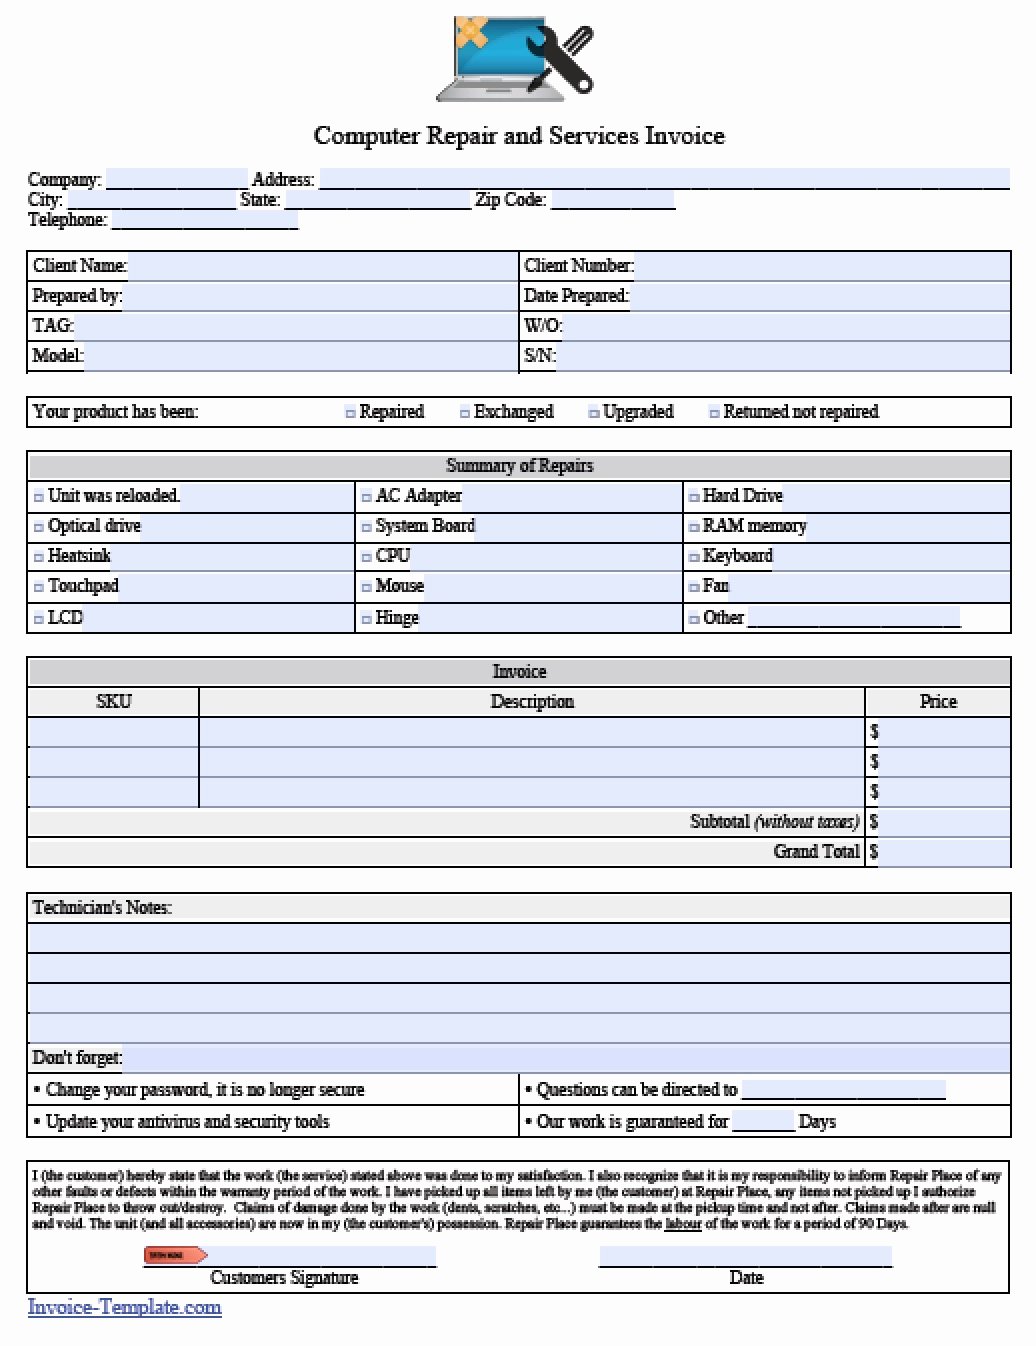 Service Invoice Template Pdf Lovely Puter Repair Invoice Template Pdf